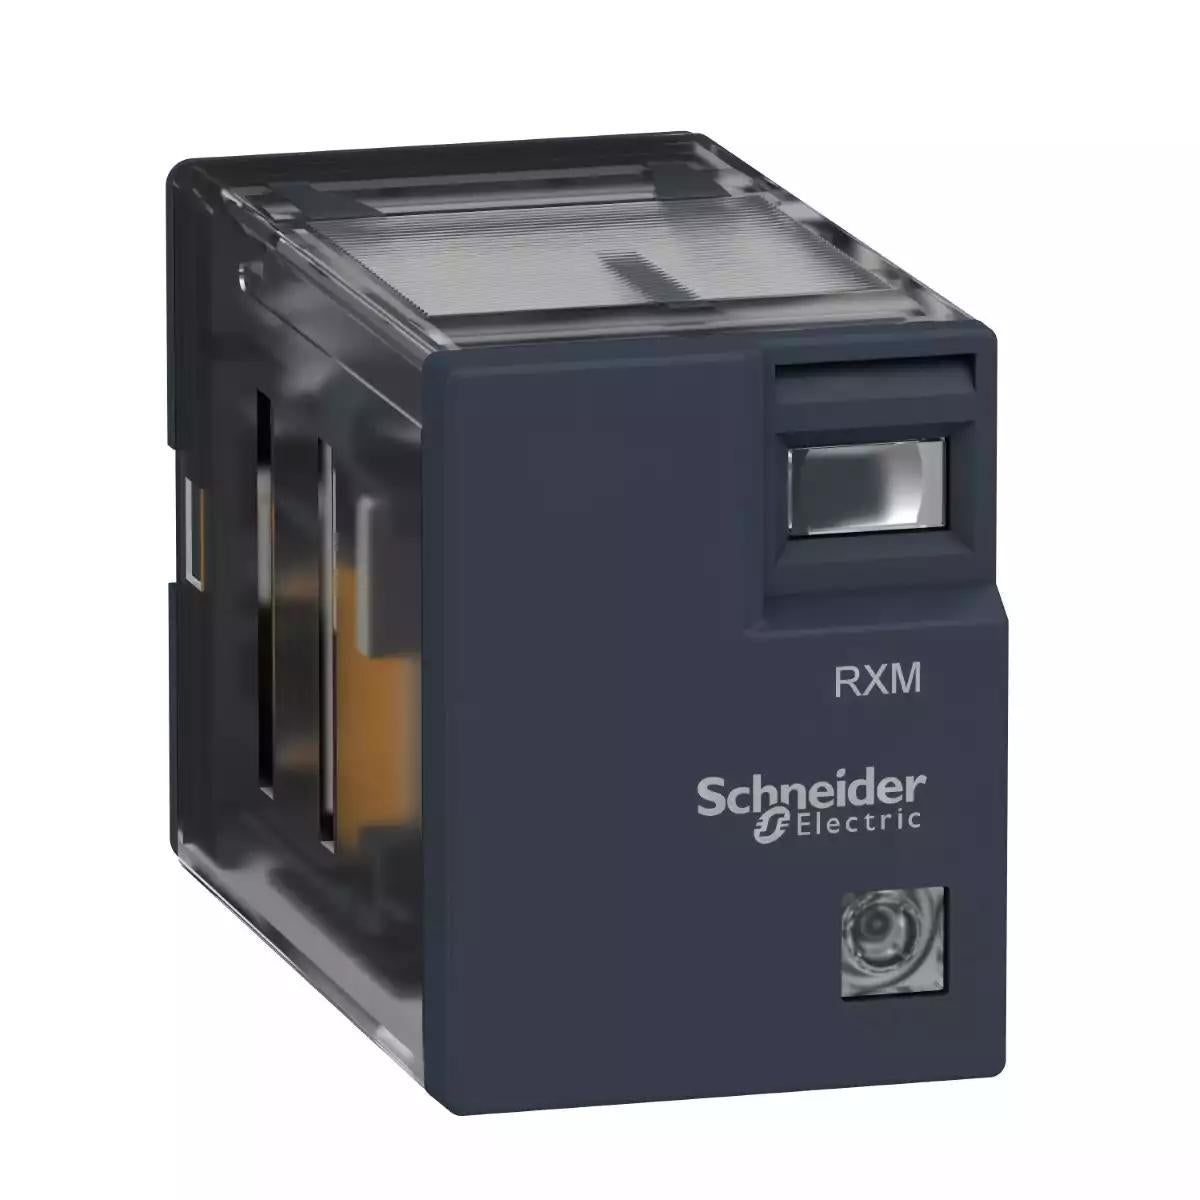 Schneider Electric Zelio RXM - Relay Miniature Plug-in relay2L - 2 C/O - 230 V AC - 5 A - with LED